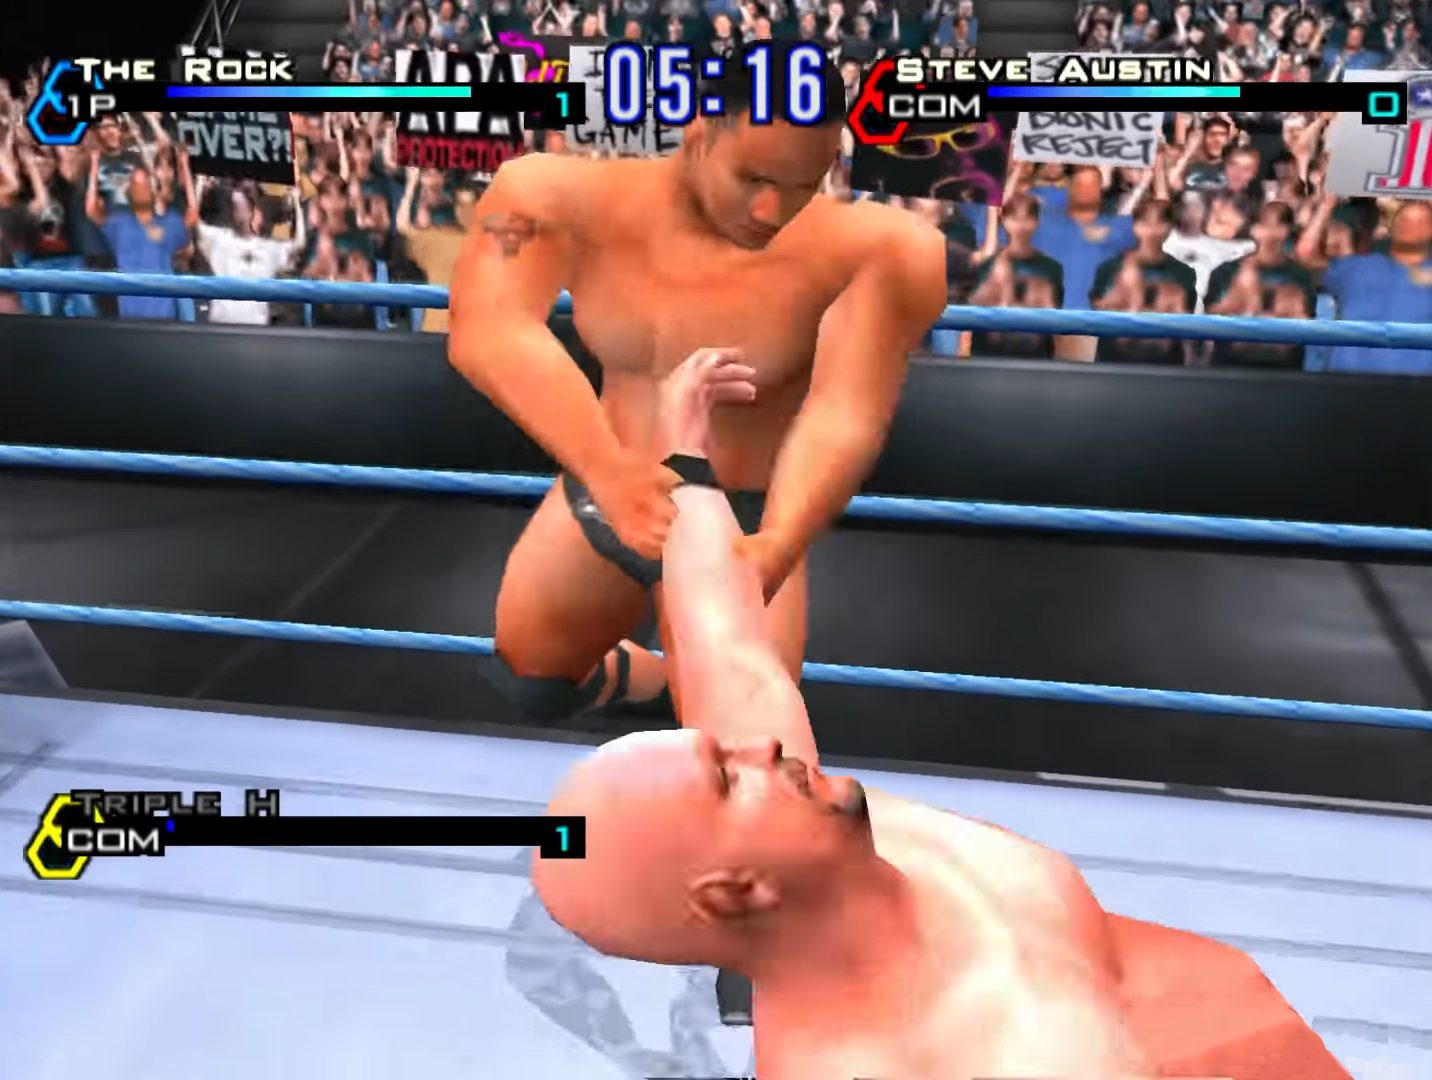 WWF SmackDown! Just Bring It (USA) PS2 ISO - CDRomance